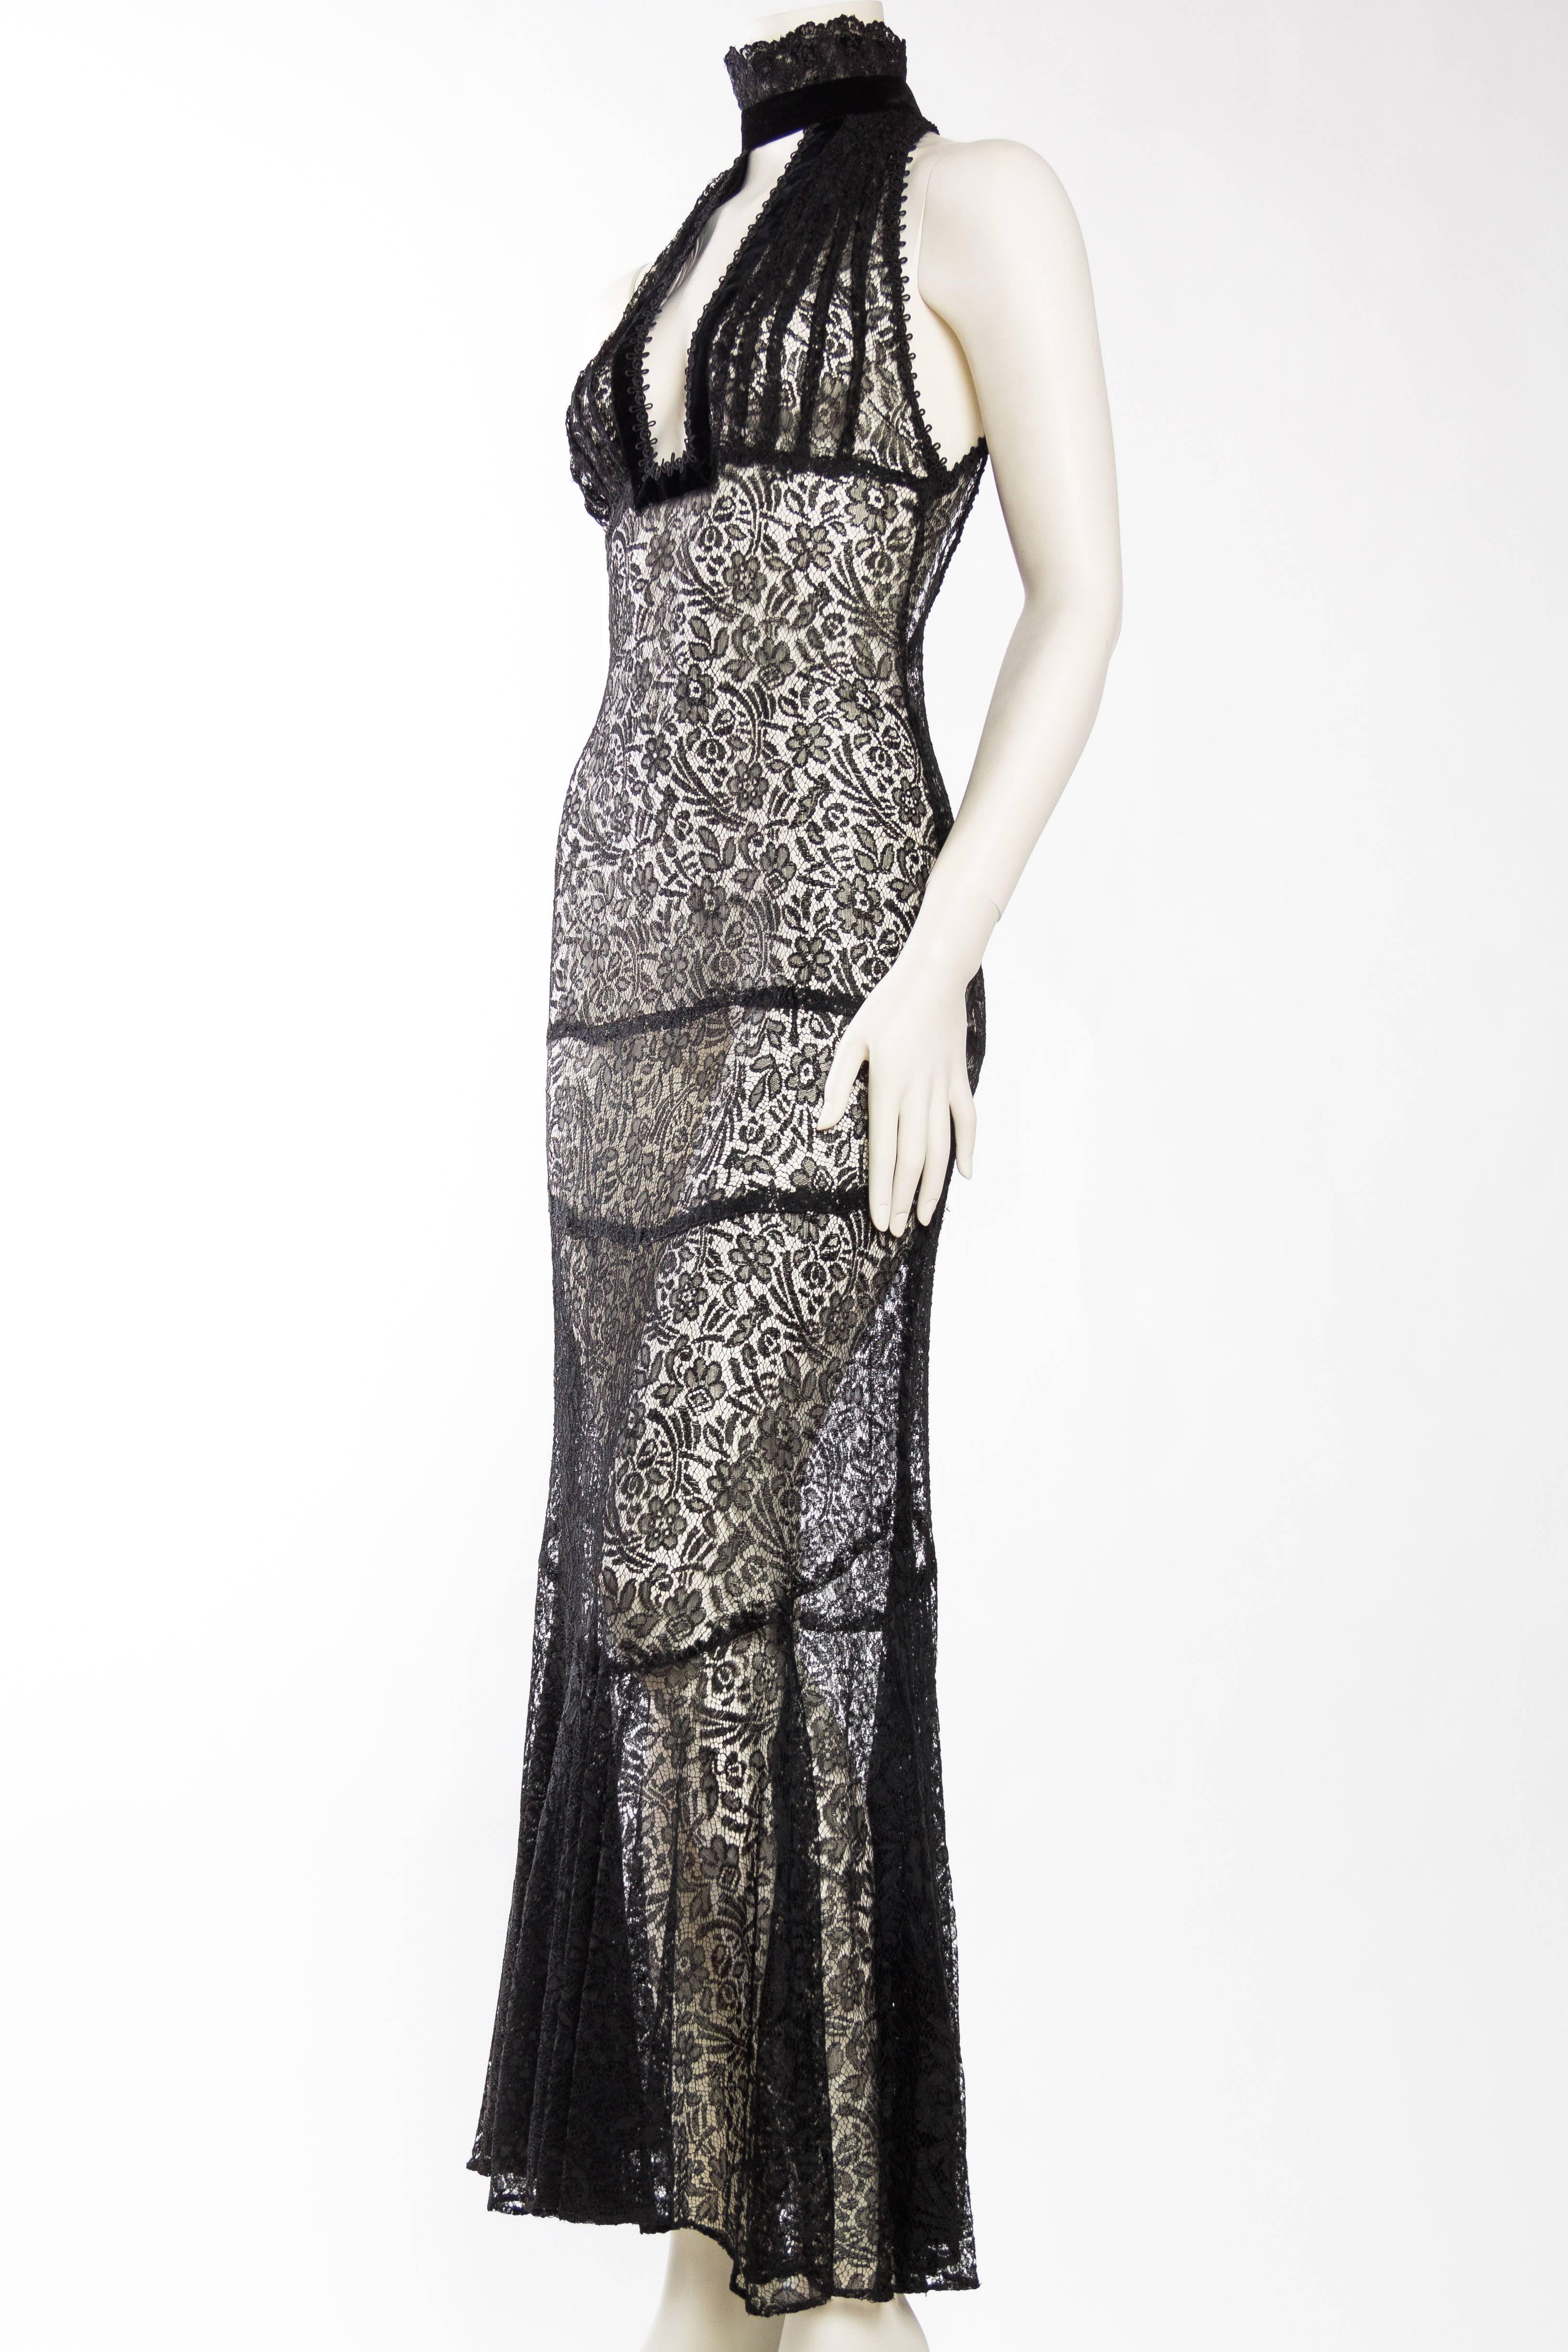 Black 1930s Art Deco Sheer Lace Gown